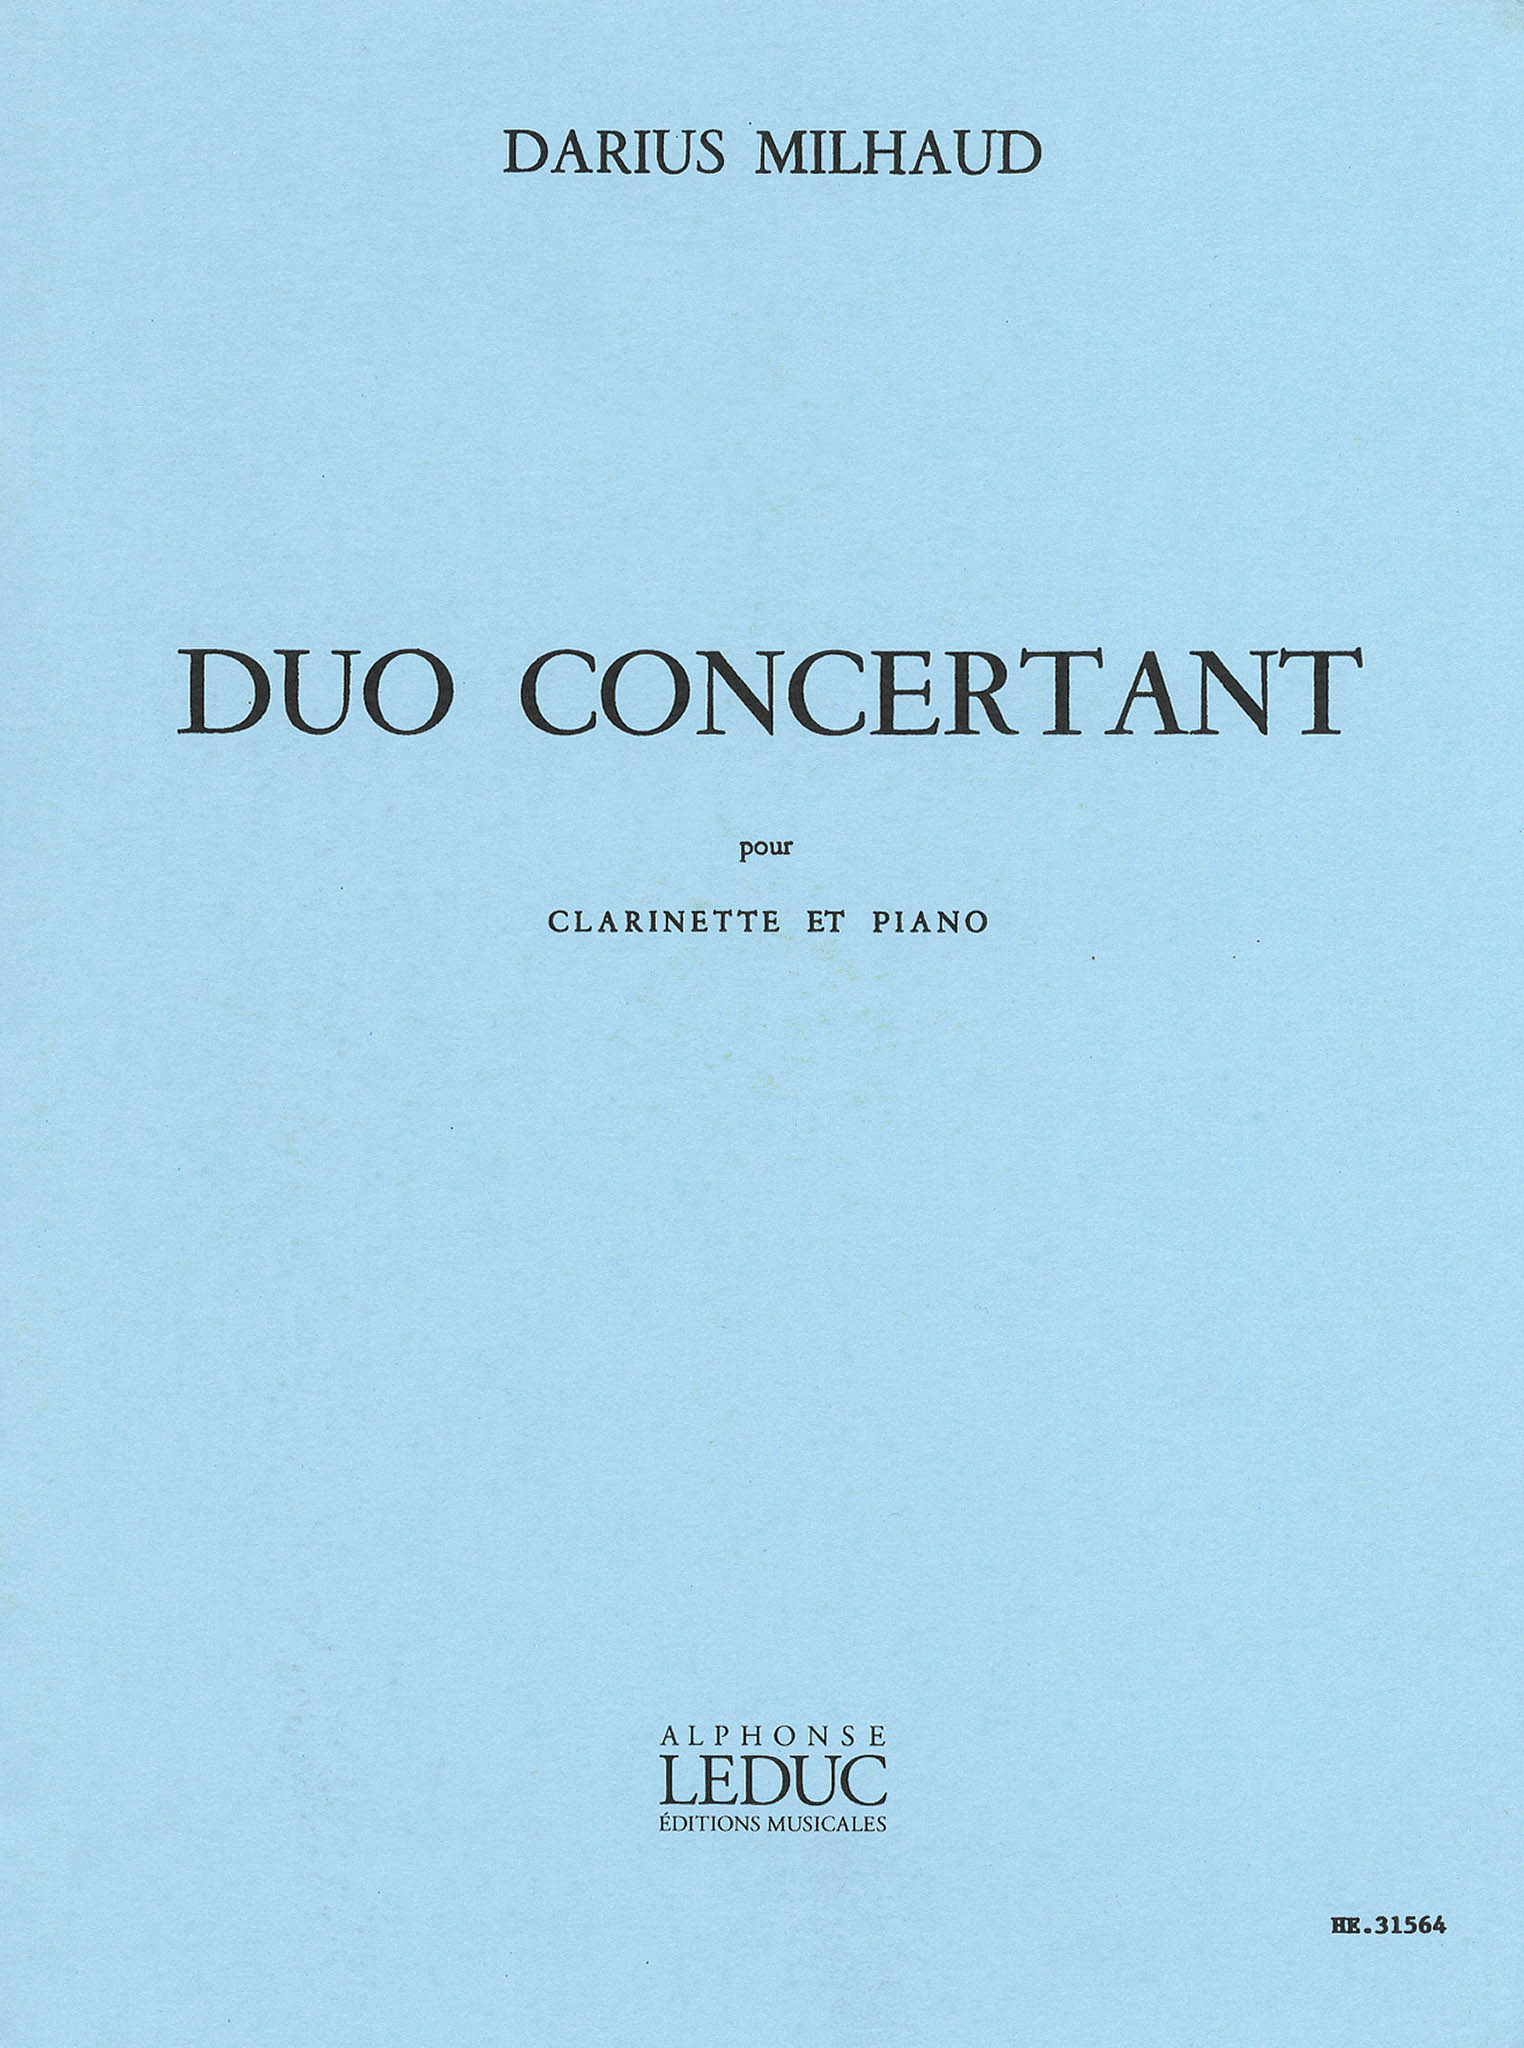 Milhaud Duo Concertant, Op. 351 cover